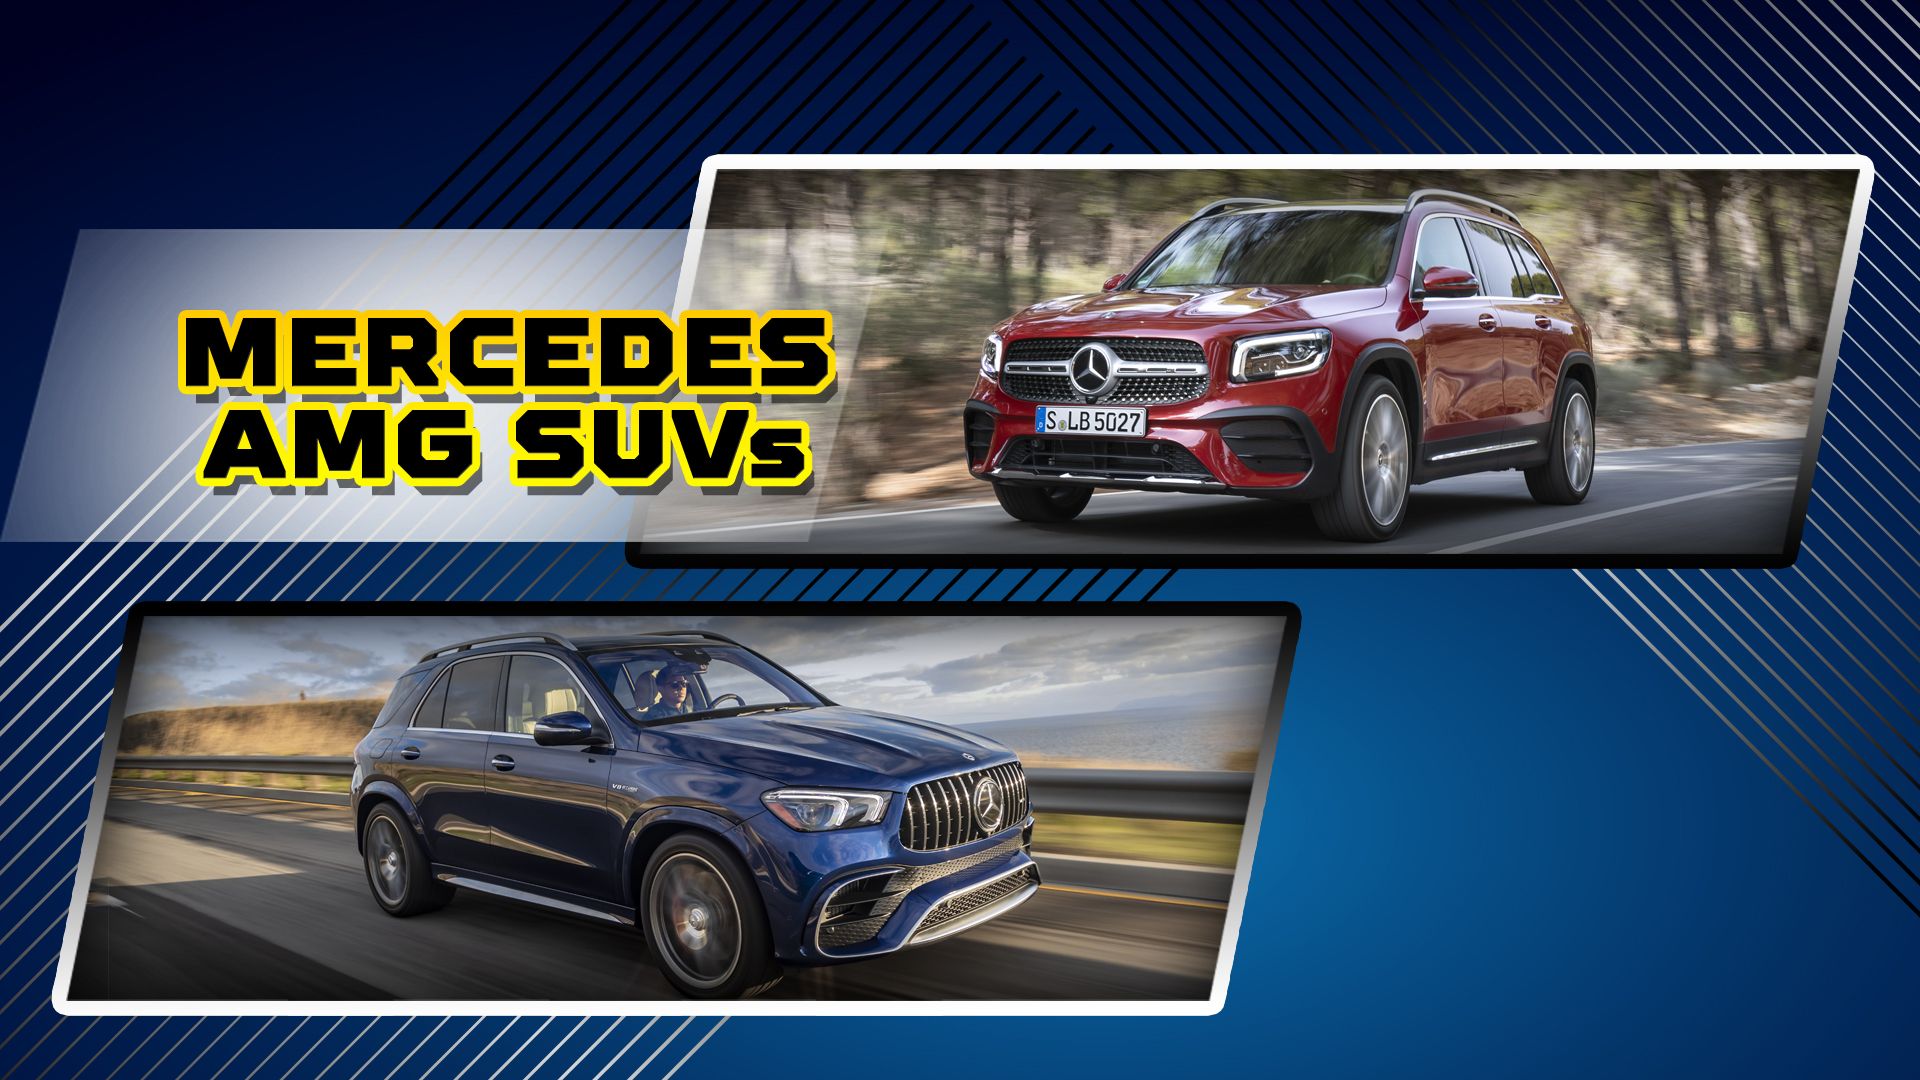 Mercedes-AMG Cars and SUVs: Reviews, Pricing, and Specs